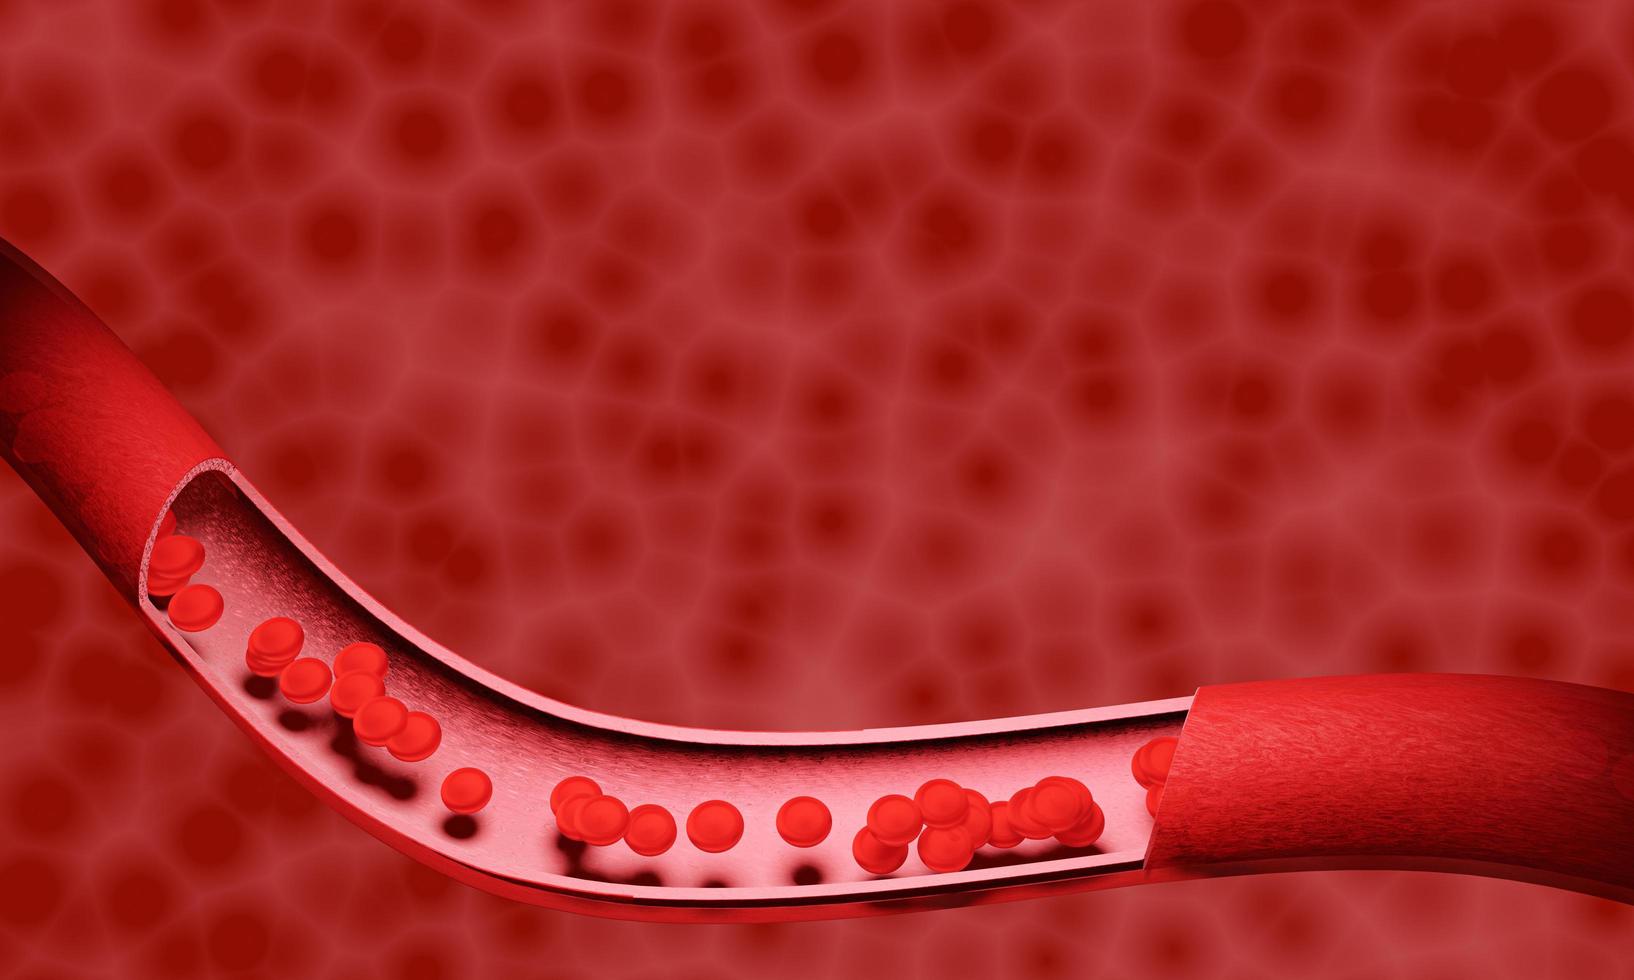 Red blood cells in an artery or blood vessel, flow inside the body, medical human health care. 3D Rendering. photo